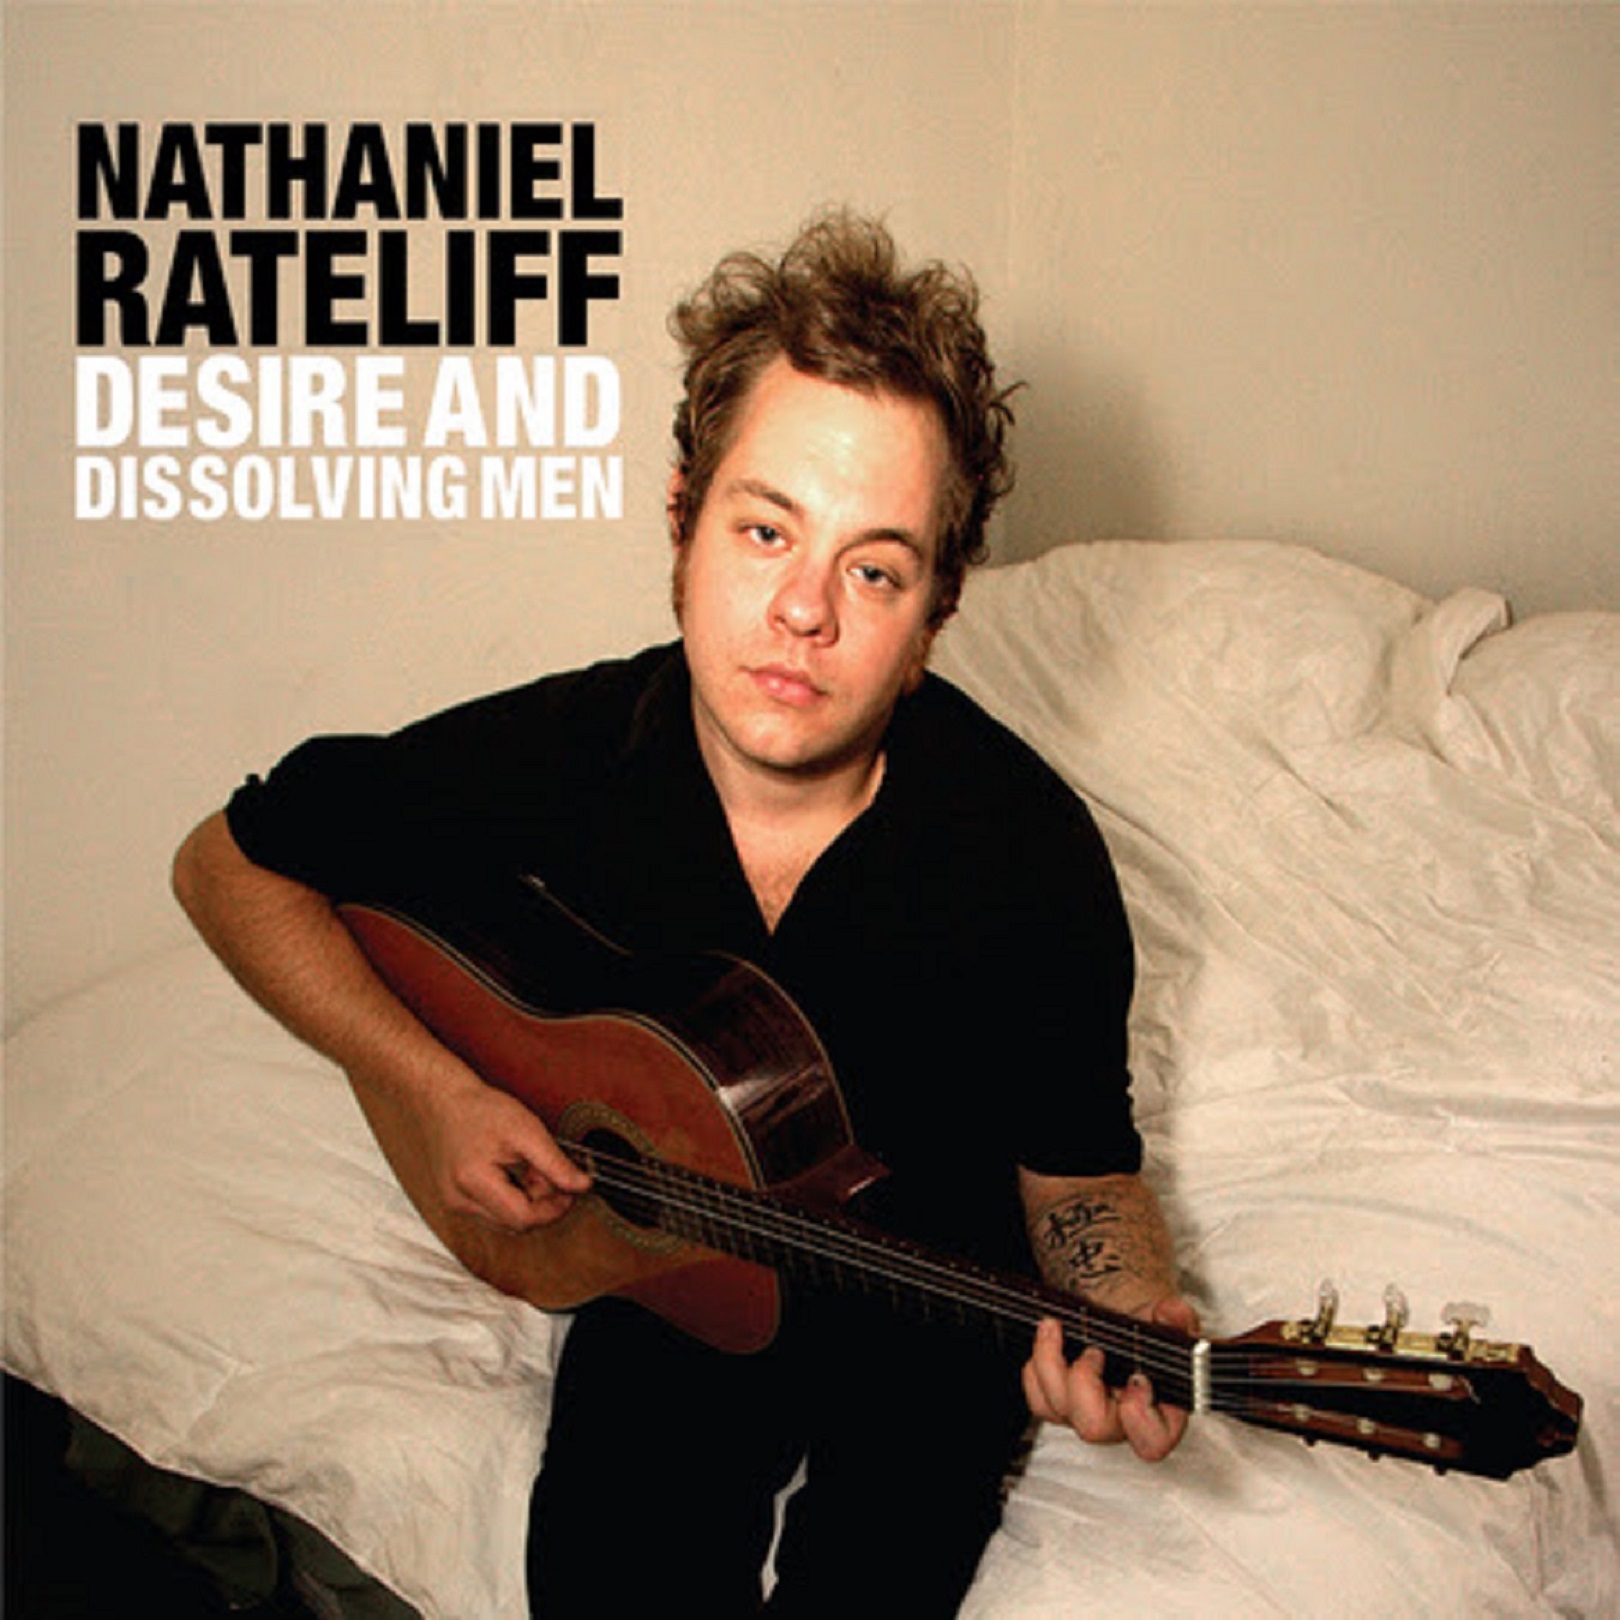 Nathaniel Rateliff’s cult favorite Desire And Dissolving Men (2007) remastered and widely available, including on vinyl, for the first time